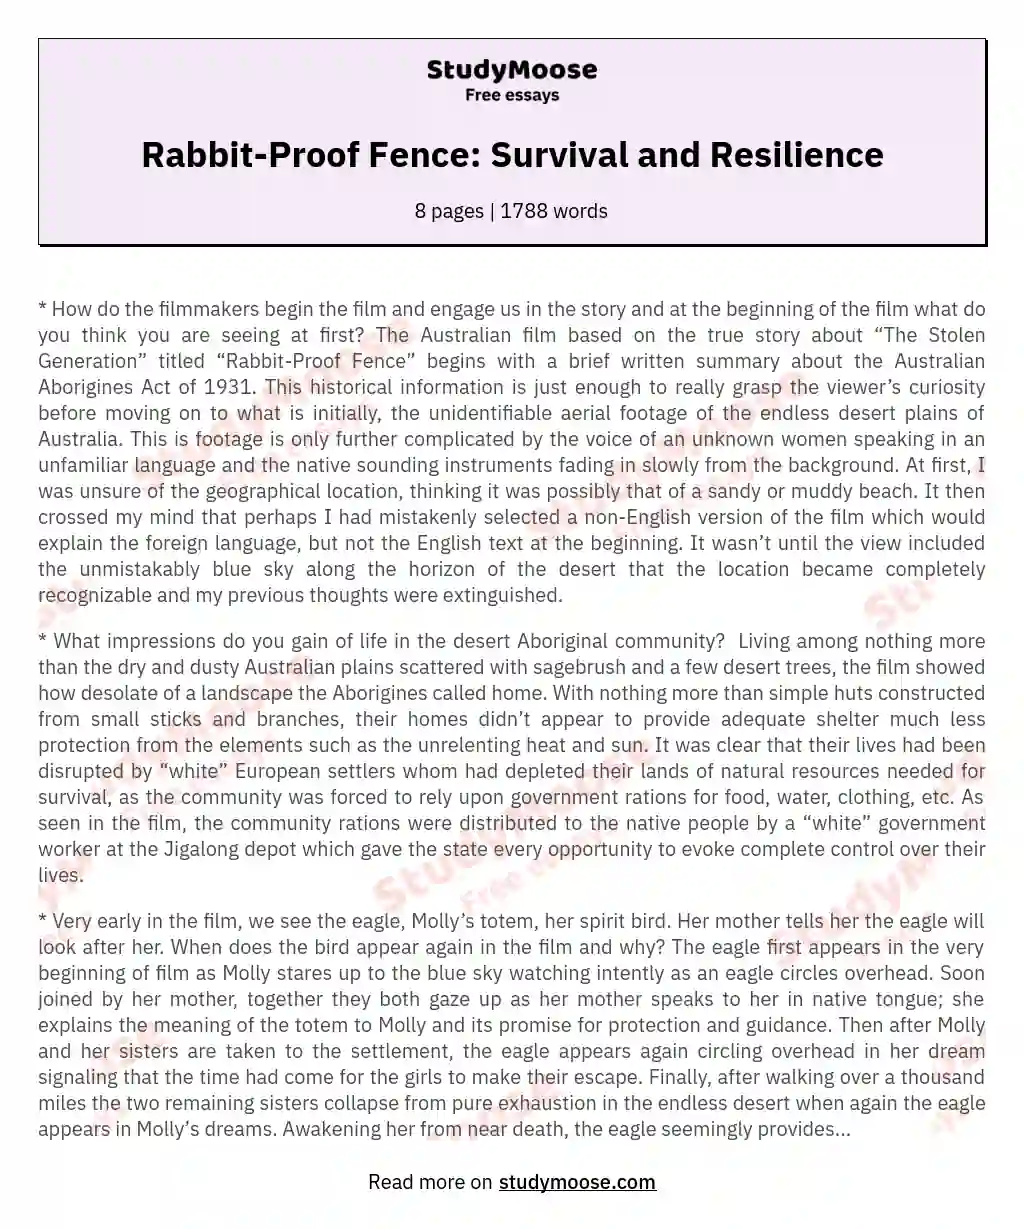 Rabbit-Proof Fence: Survival and Resilience essay